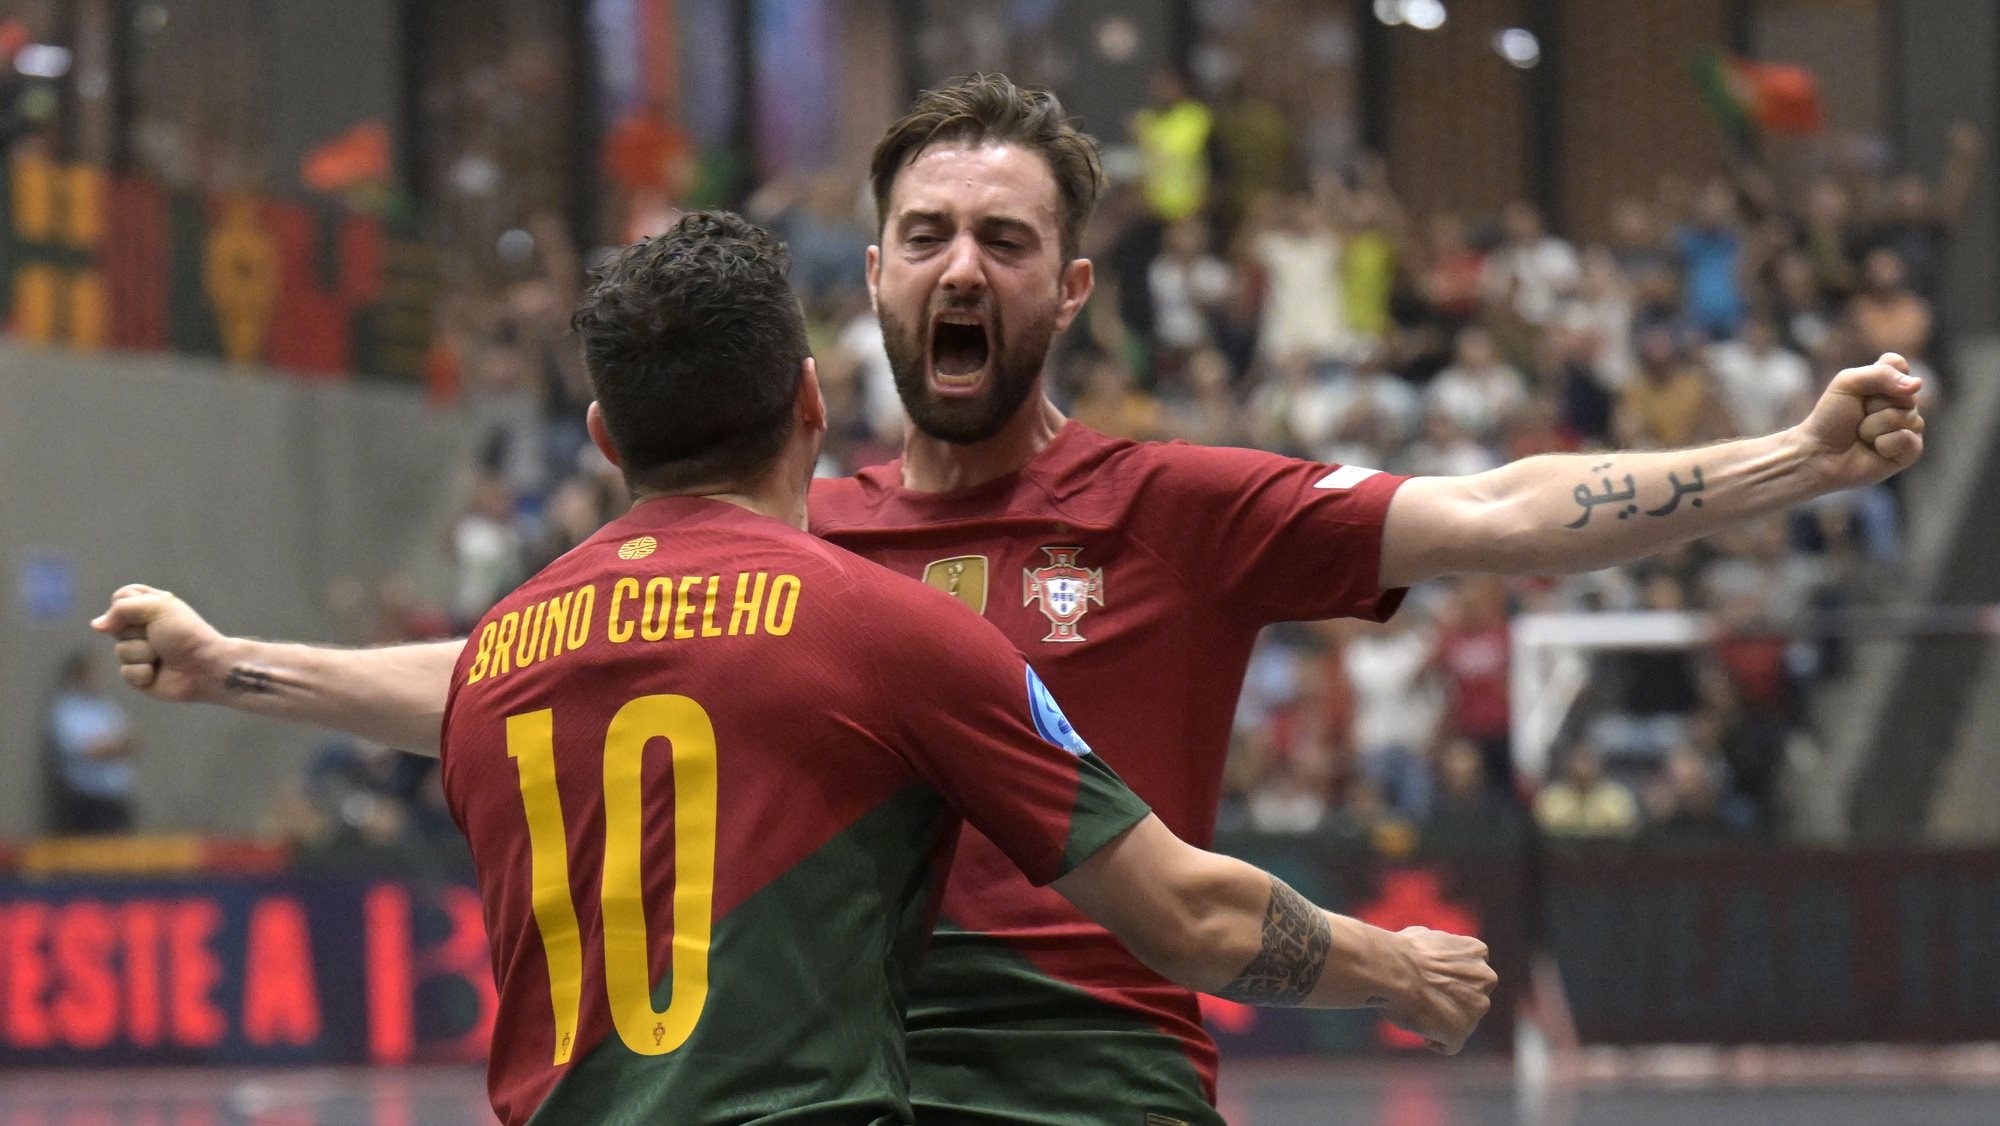 Portugal player Tiago Brito (R) and Bruno Coelho celebrate a goal against Belarus during the World Cup 2024 Qualifying Round 4 futsal match, held at Paredes Multipurpose Pavilion, in Paredes, Portugal, 6 October 2022. FERNANDO VELUDO/LUSA